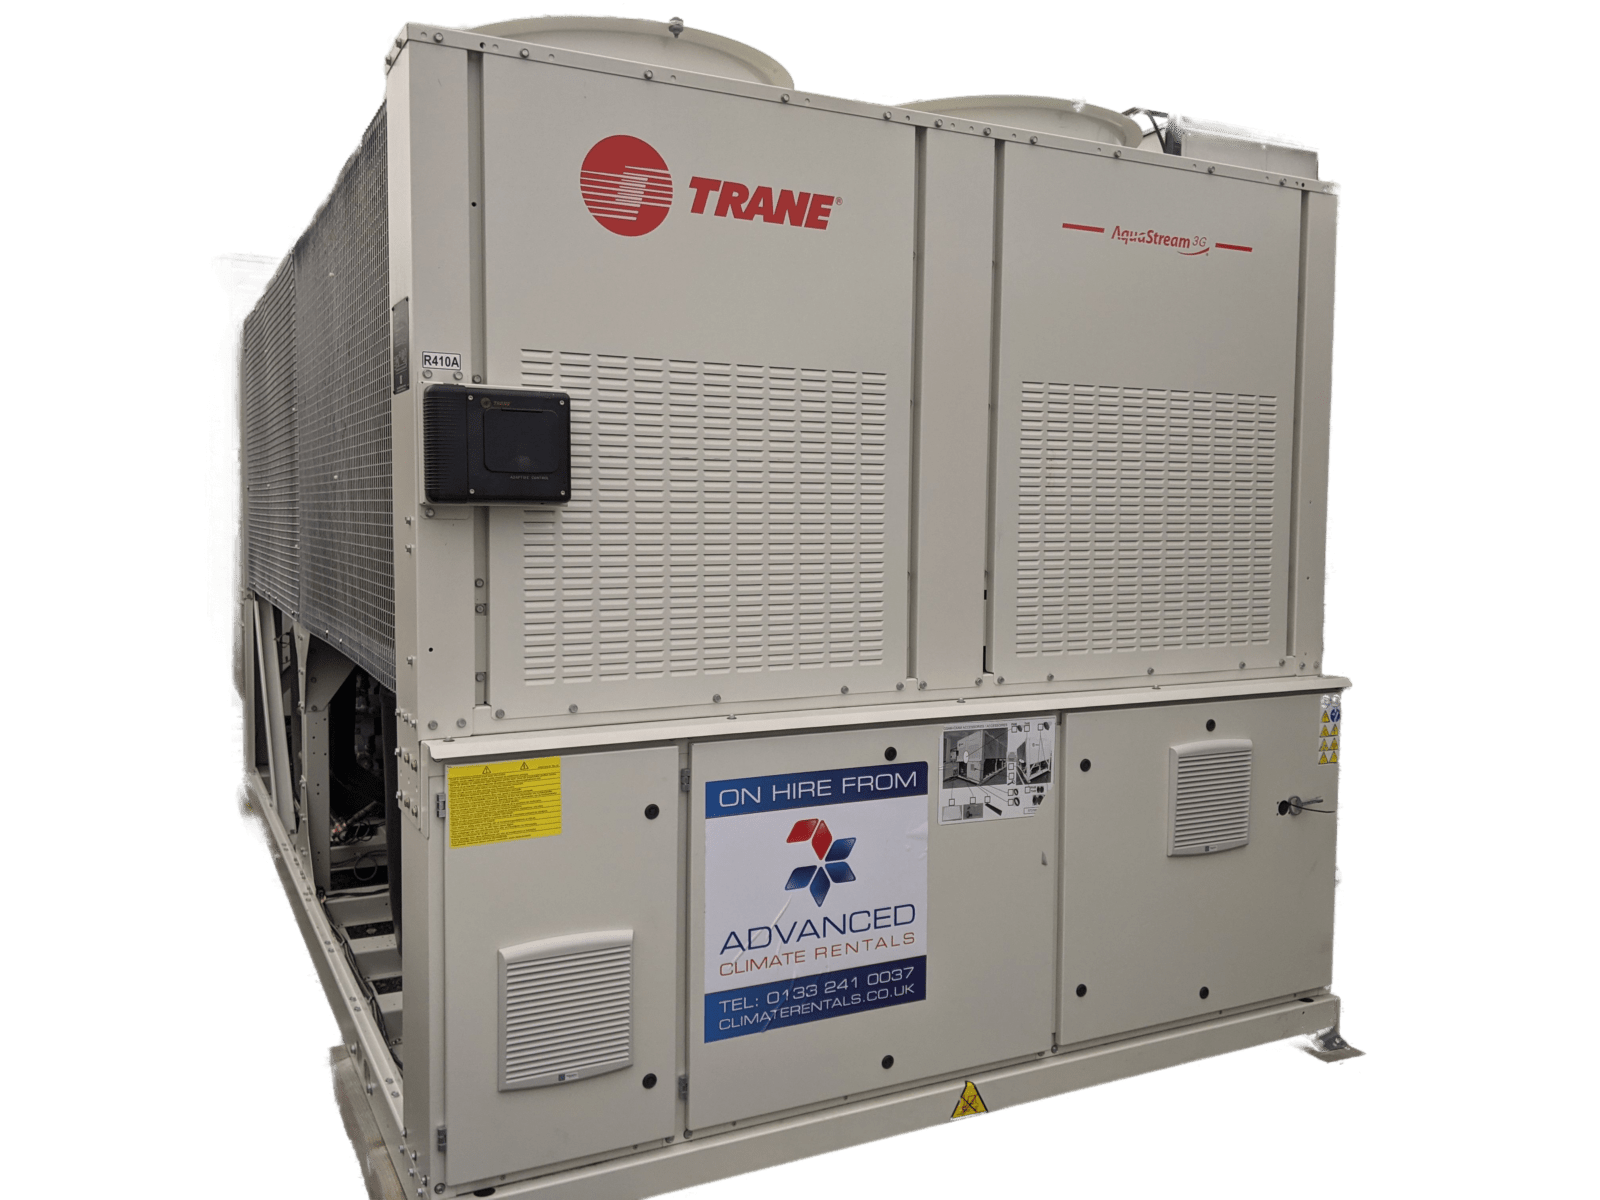 390kw portable chillers can be installed quickly